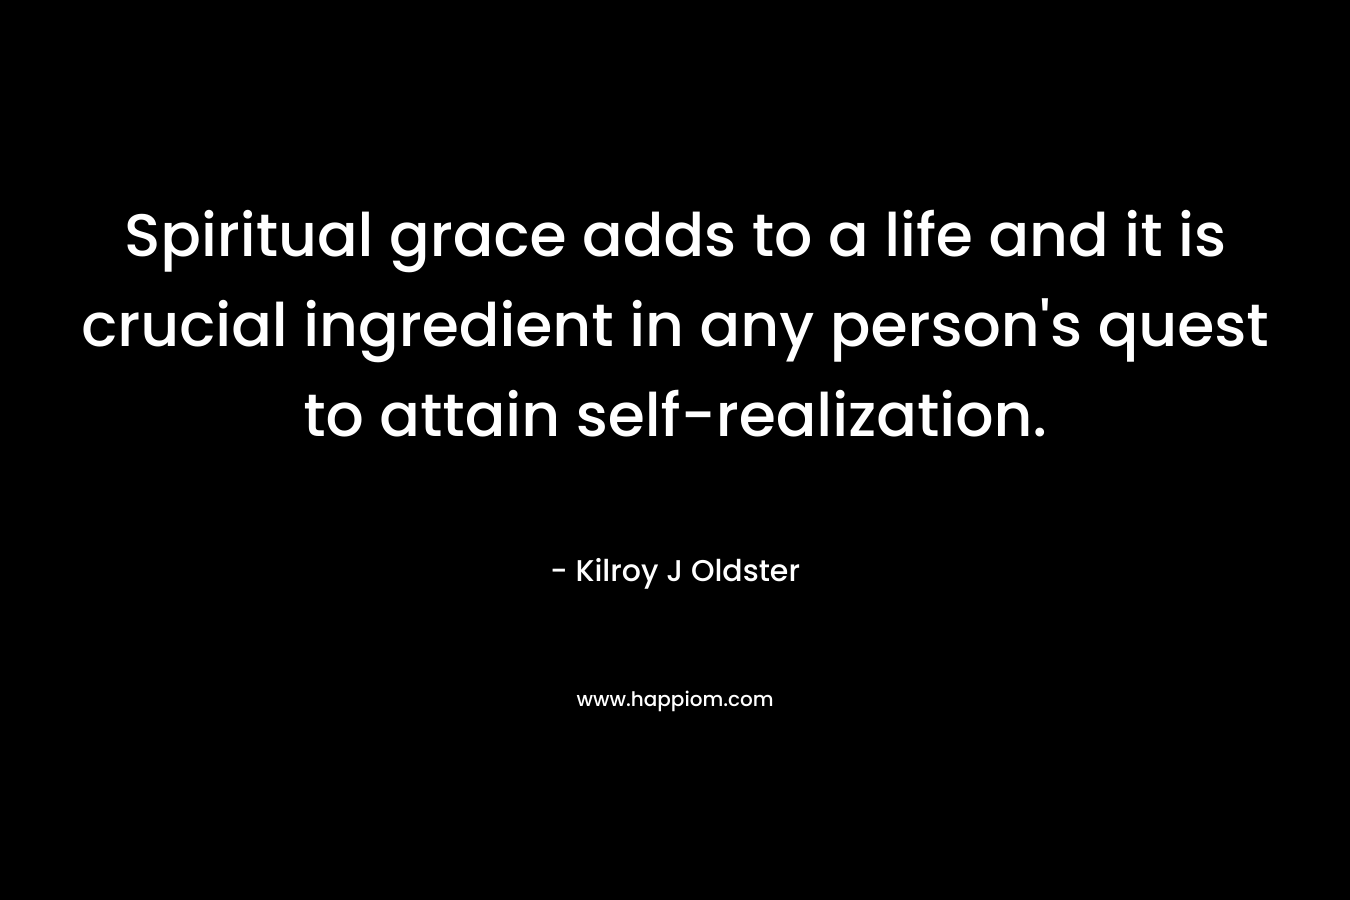 Spiritual grace adds to a life and it is crucial ingredient in any person's quest to attain self-realization.